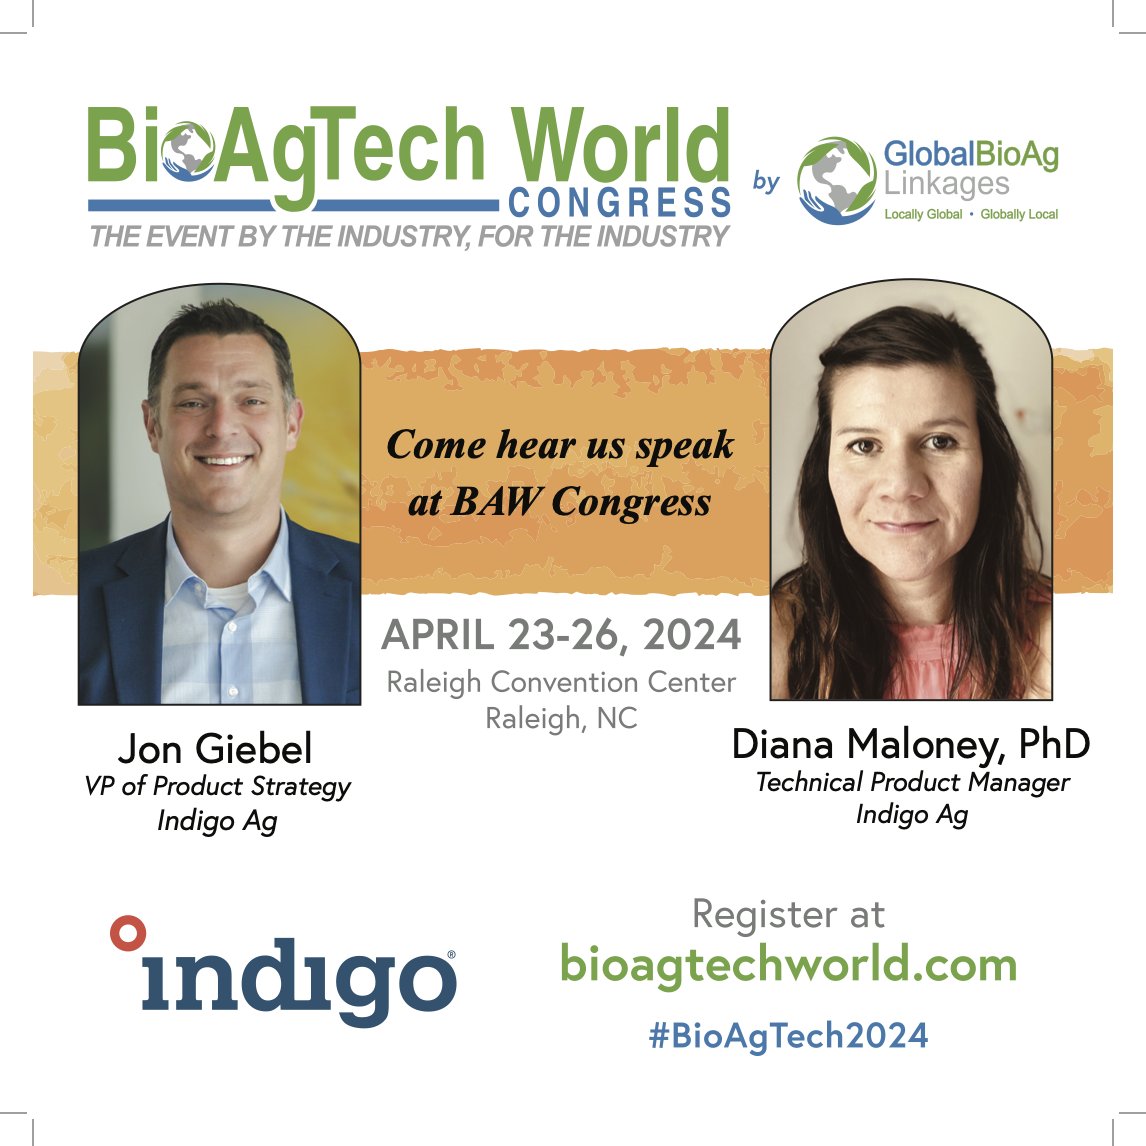 It's almost time for the BioAgTech World Congress in Raleigh, North Carolina! Come meet our experts and learn about the latest developments in biological products. Learn more about Indigo Ag's portfolio here: indigo.bz/4b0P1yR